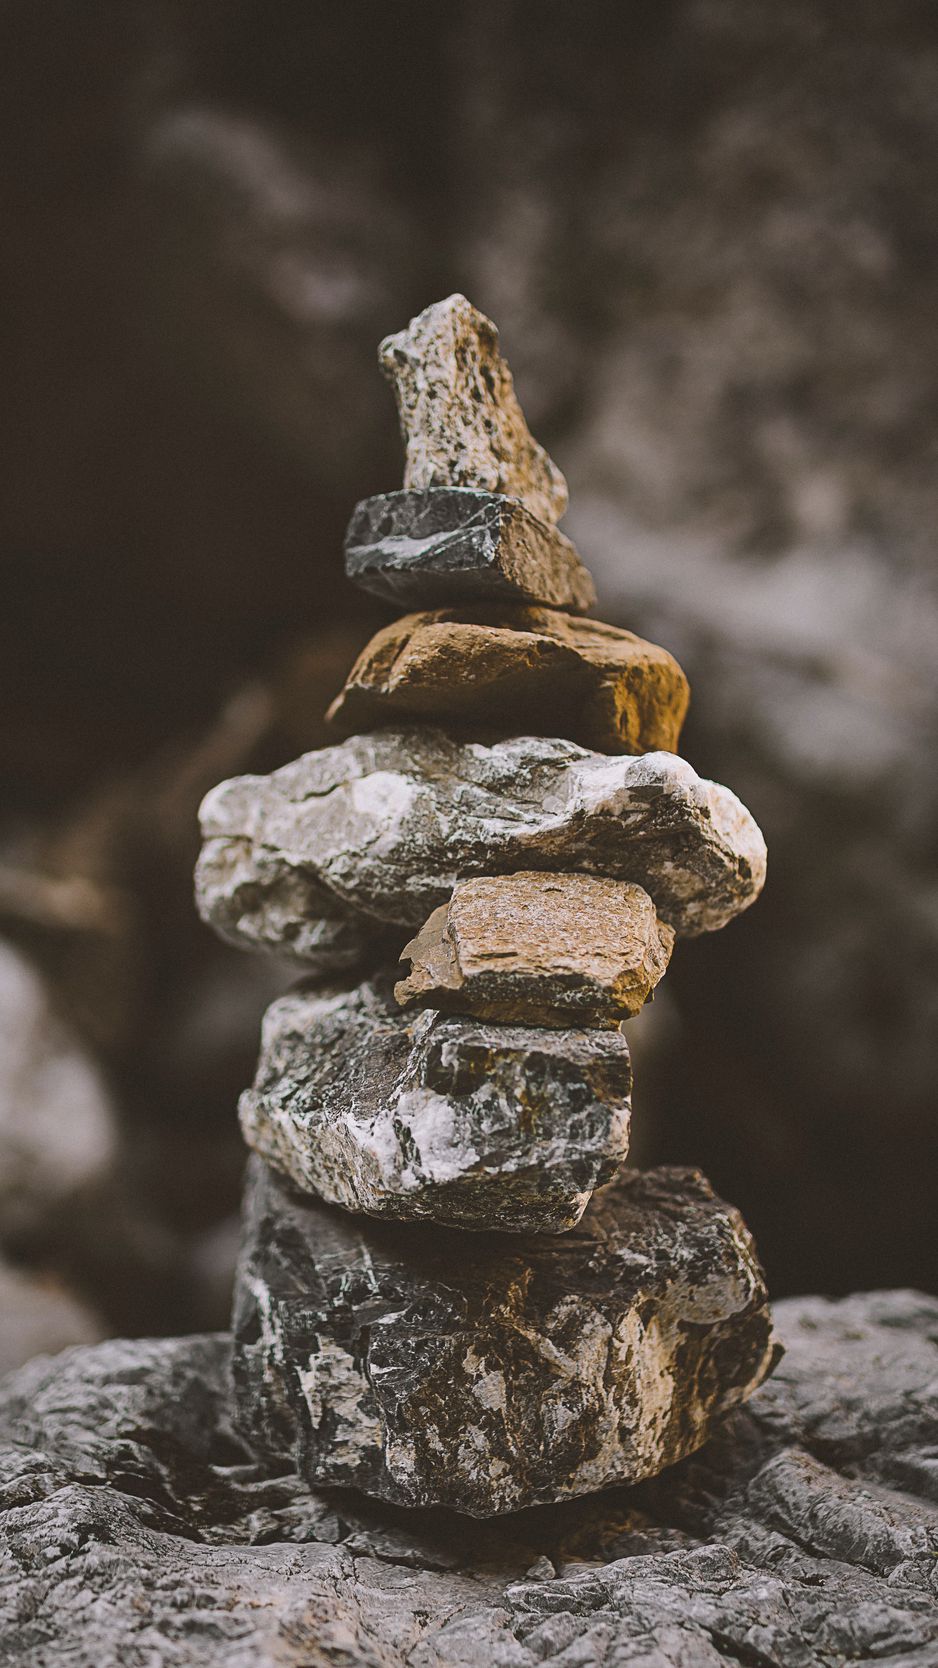 Download wallpaper 938x1668 stones, balance, rock, stone iphone 8/7/6s/6  for parallax hd background